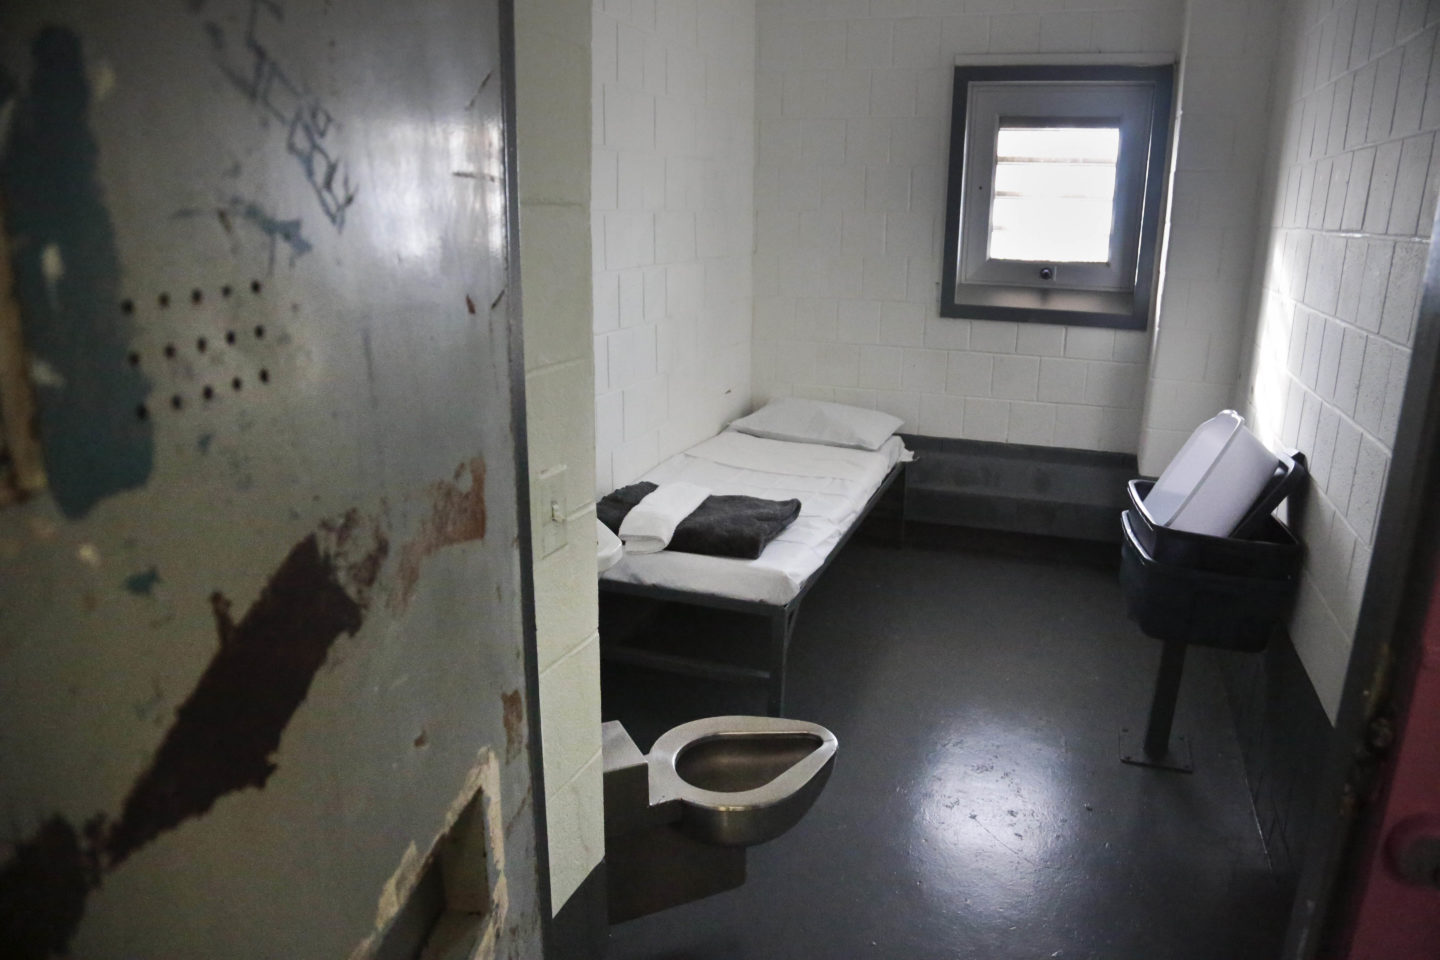 Freezing Jail Cells, Broken Showers, and Covid-19